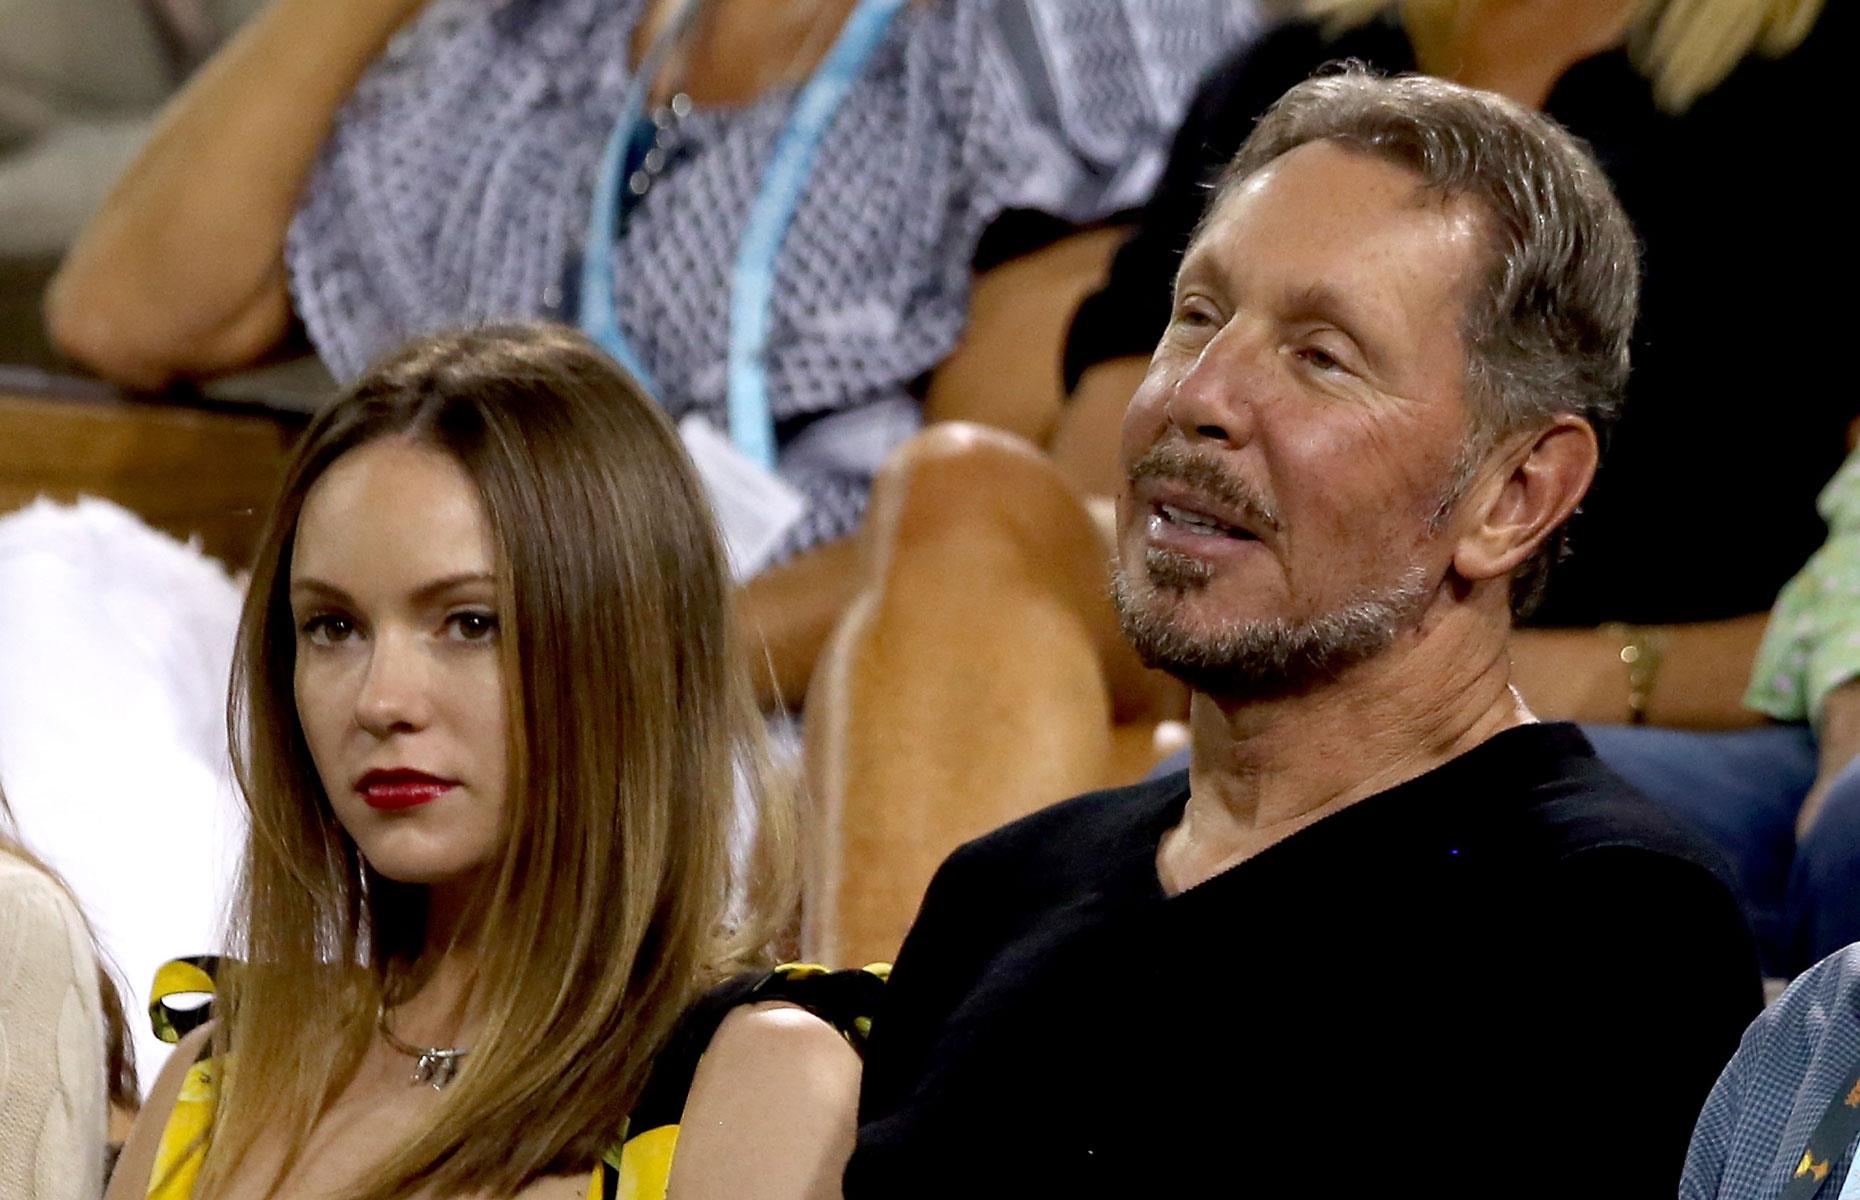 At the age of 73, Larry Ellison shows no sign of slowing down